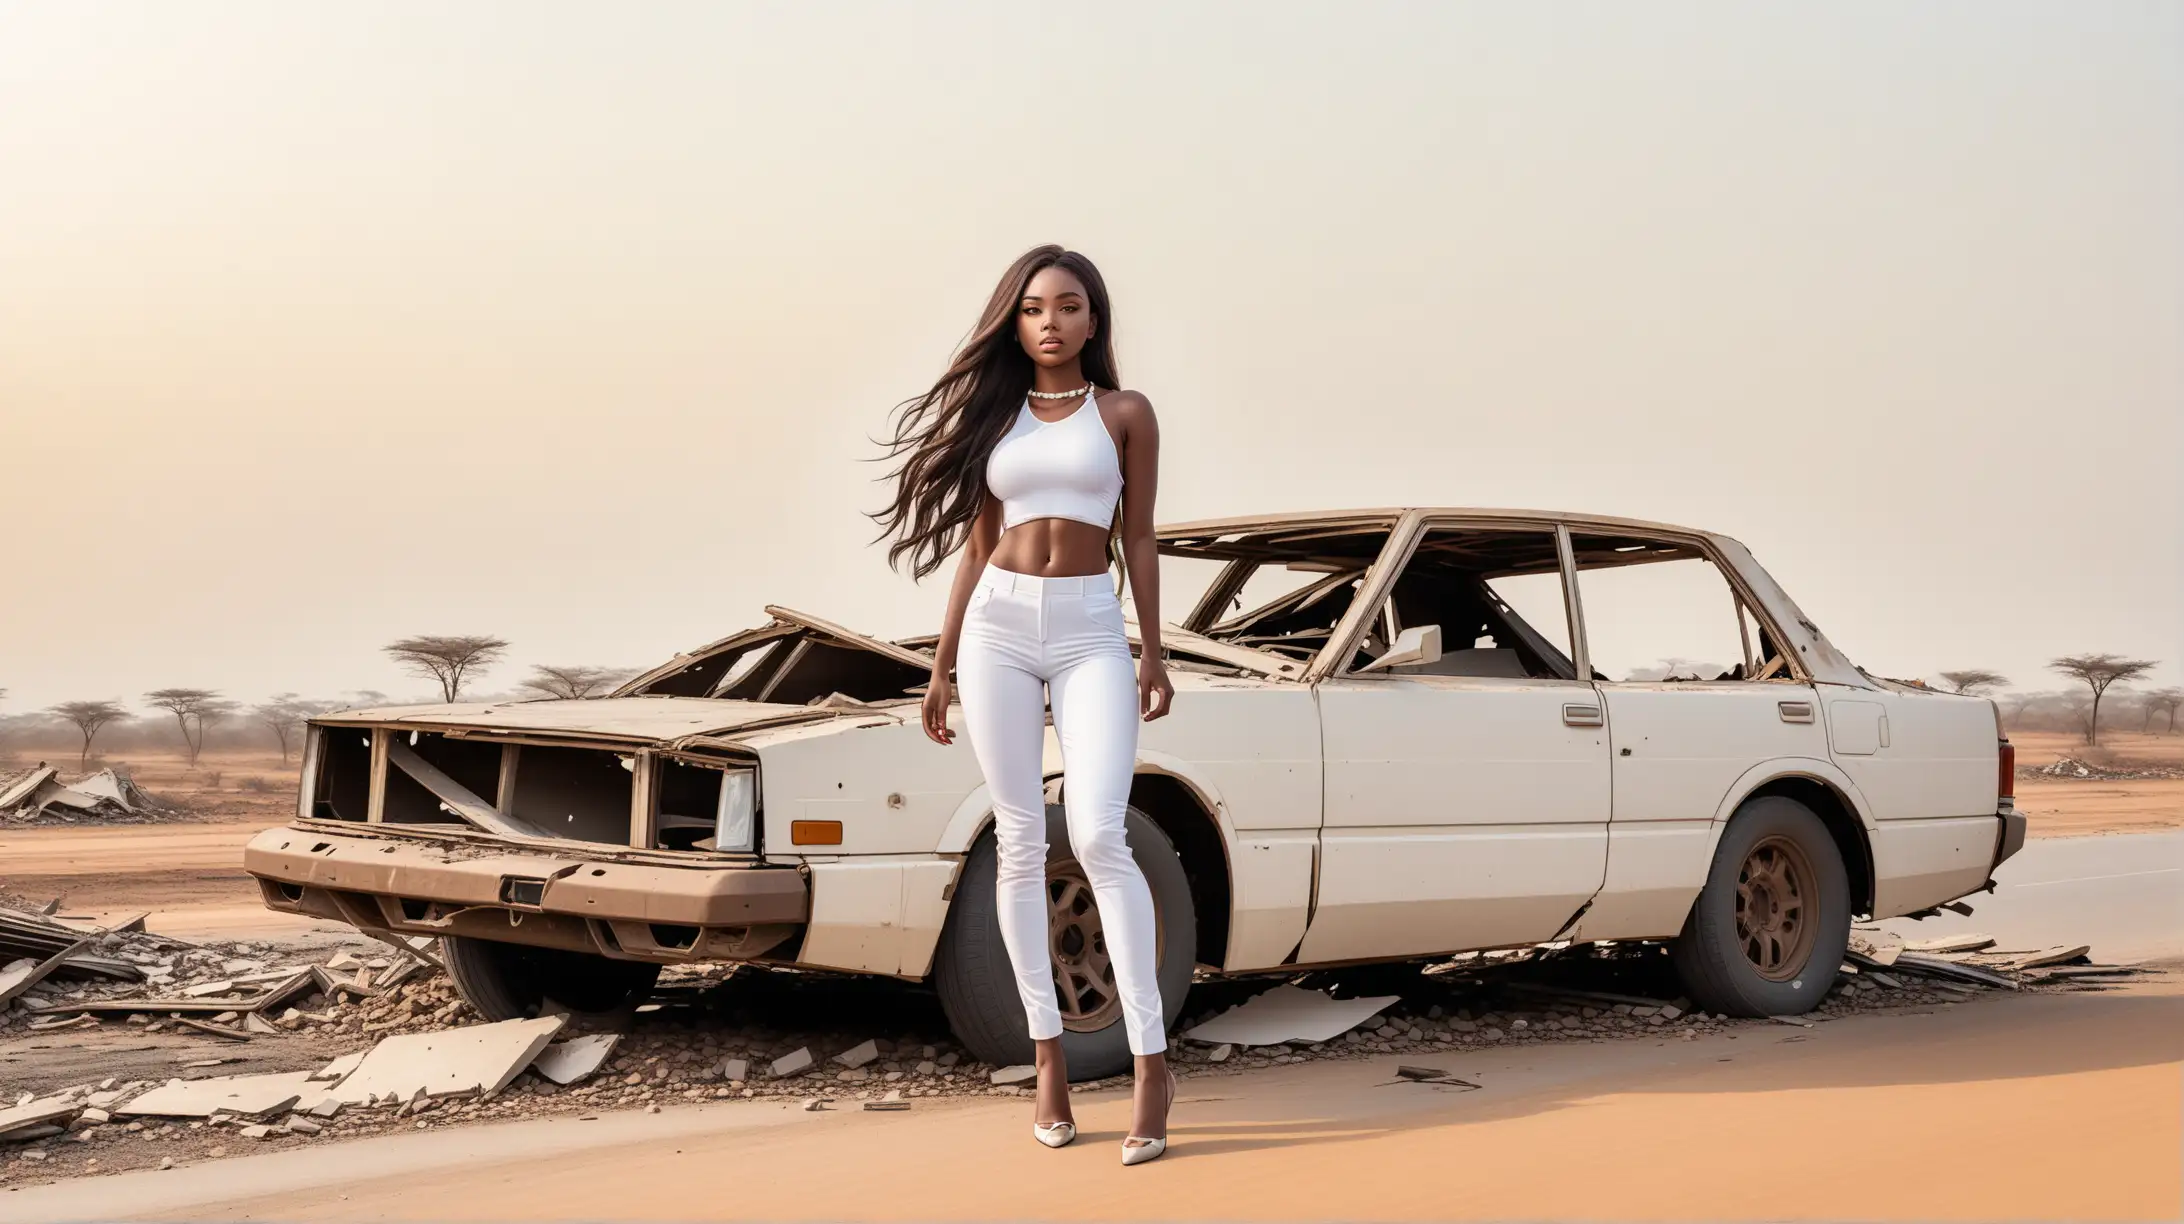 African Woman Standing on Demolished Car in Deserted Road